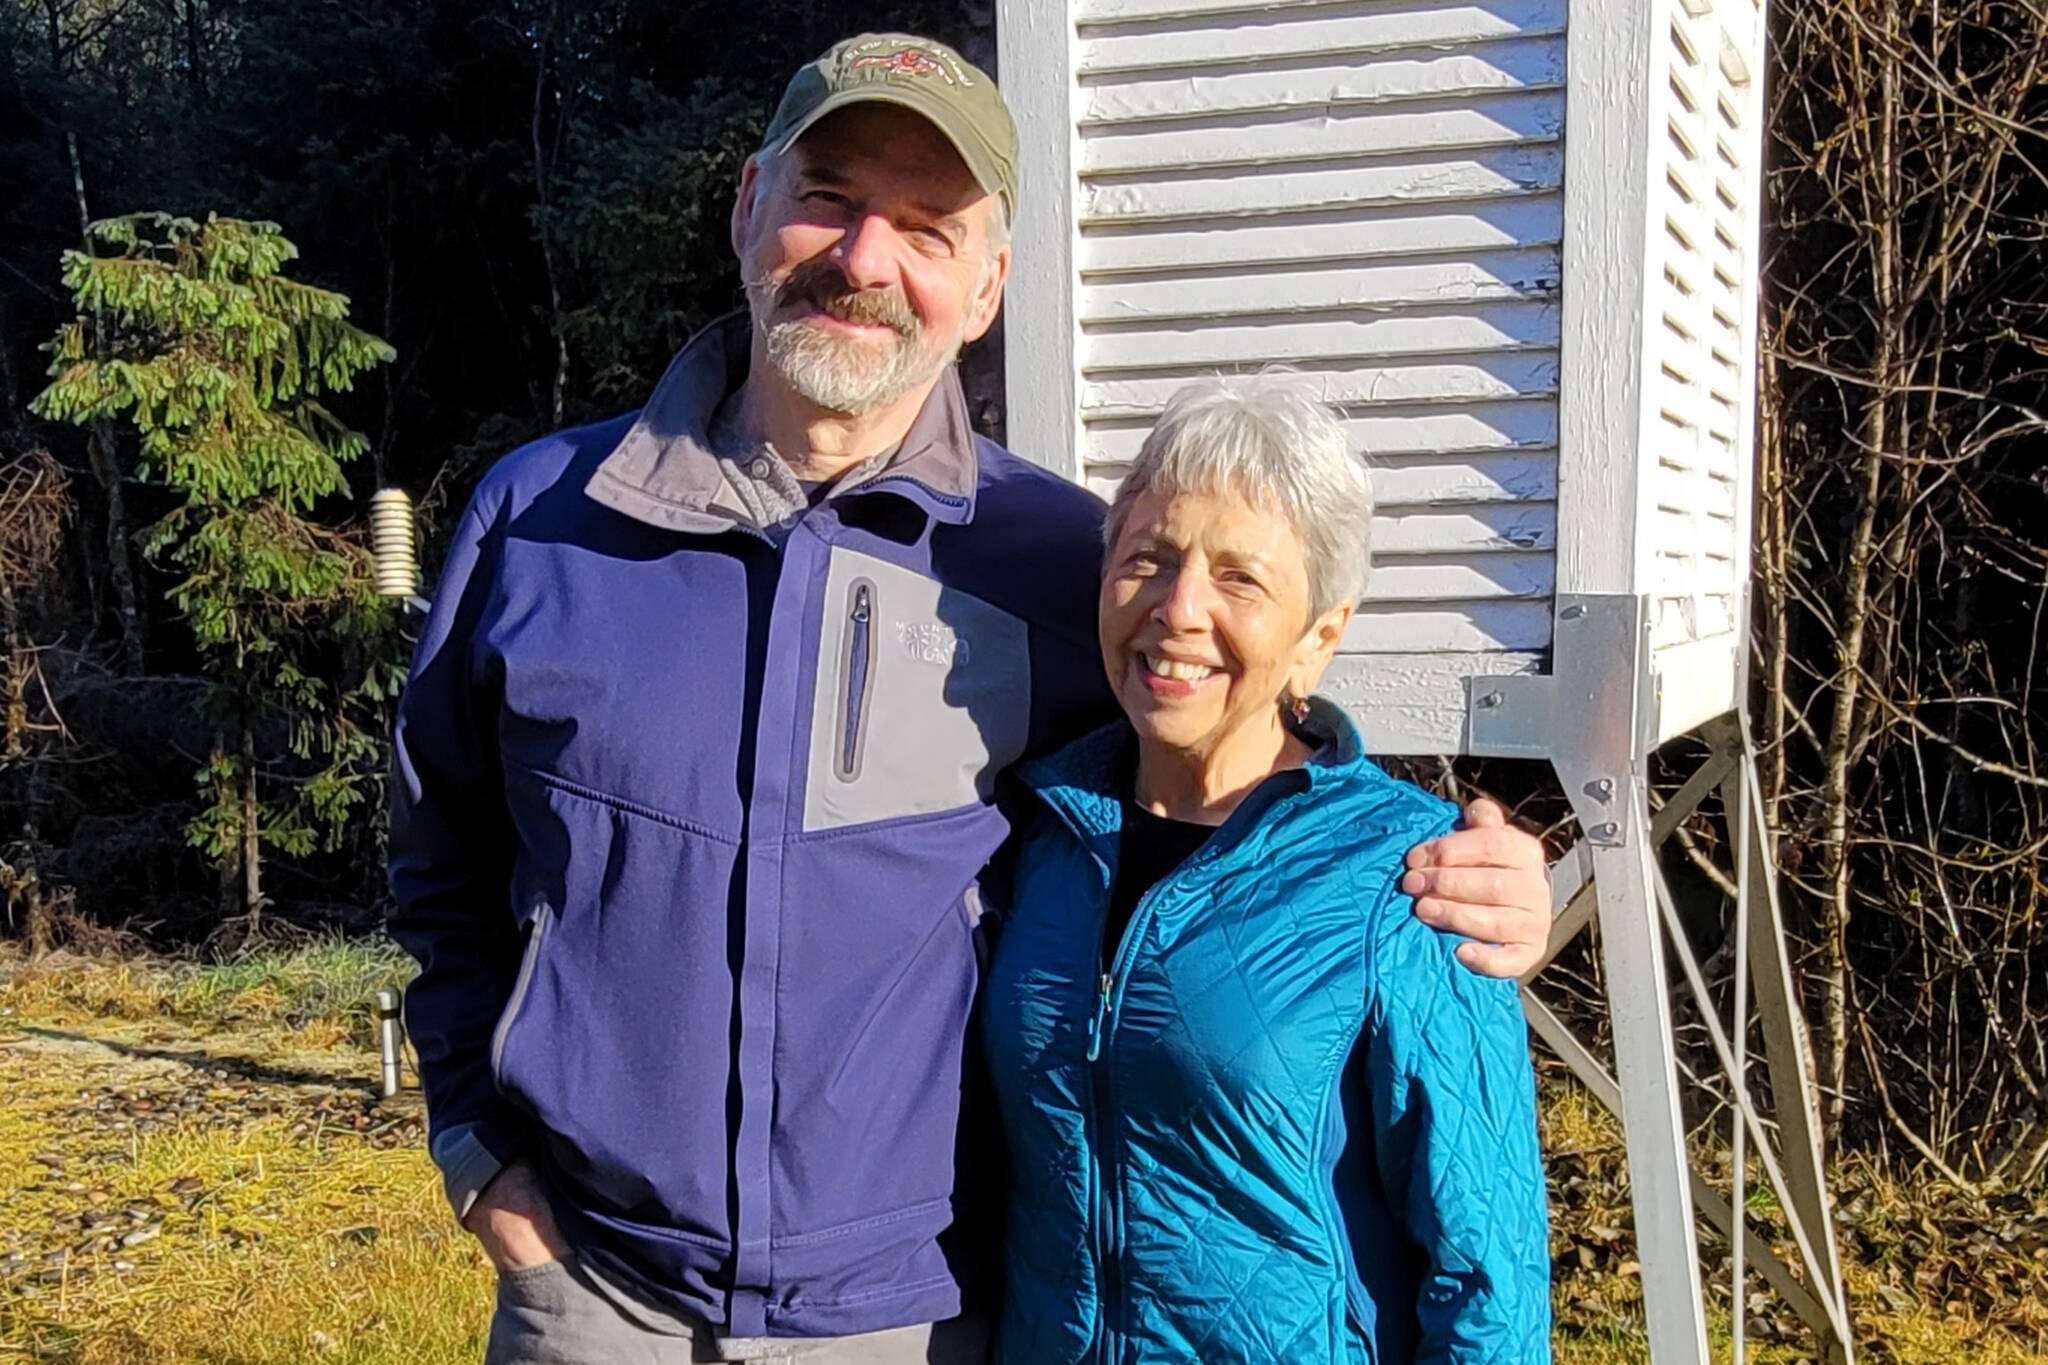 Jim Wild, left, and Mary Jo Lord-Wild, right, stand outside a weather collection station similar to one they have at their home in Elfin Cove. Lord-Wild recently received the Thomas Jefferson Award for her volunteer work collecting weather data over the last 47 years. (Courtesy photo/Kimberly Vaughan)